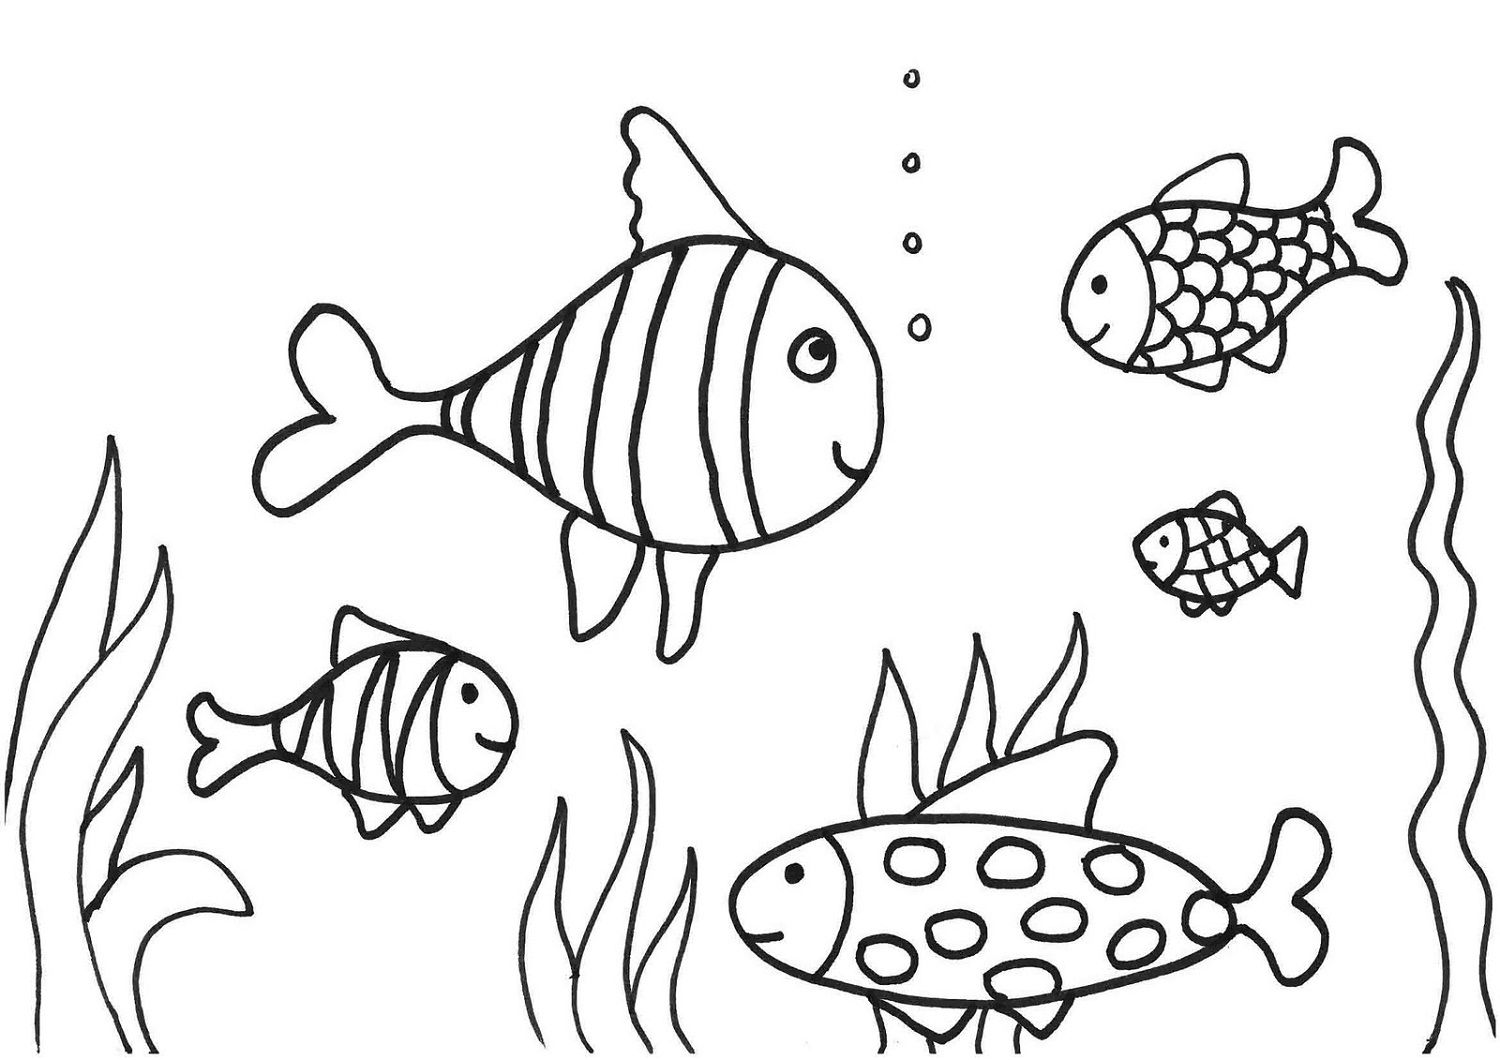 Fish coloring page printable activity shelter fish coloring page coloring pages for kids free coloring pages